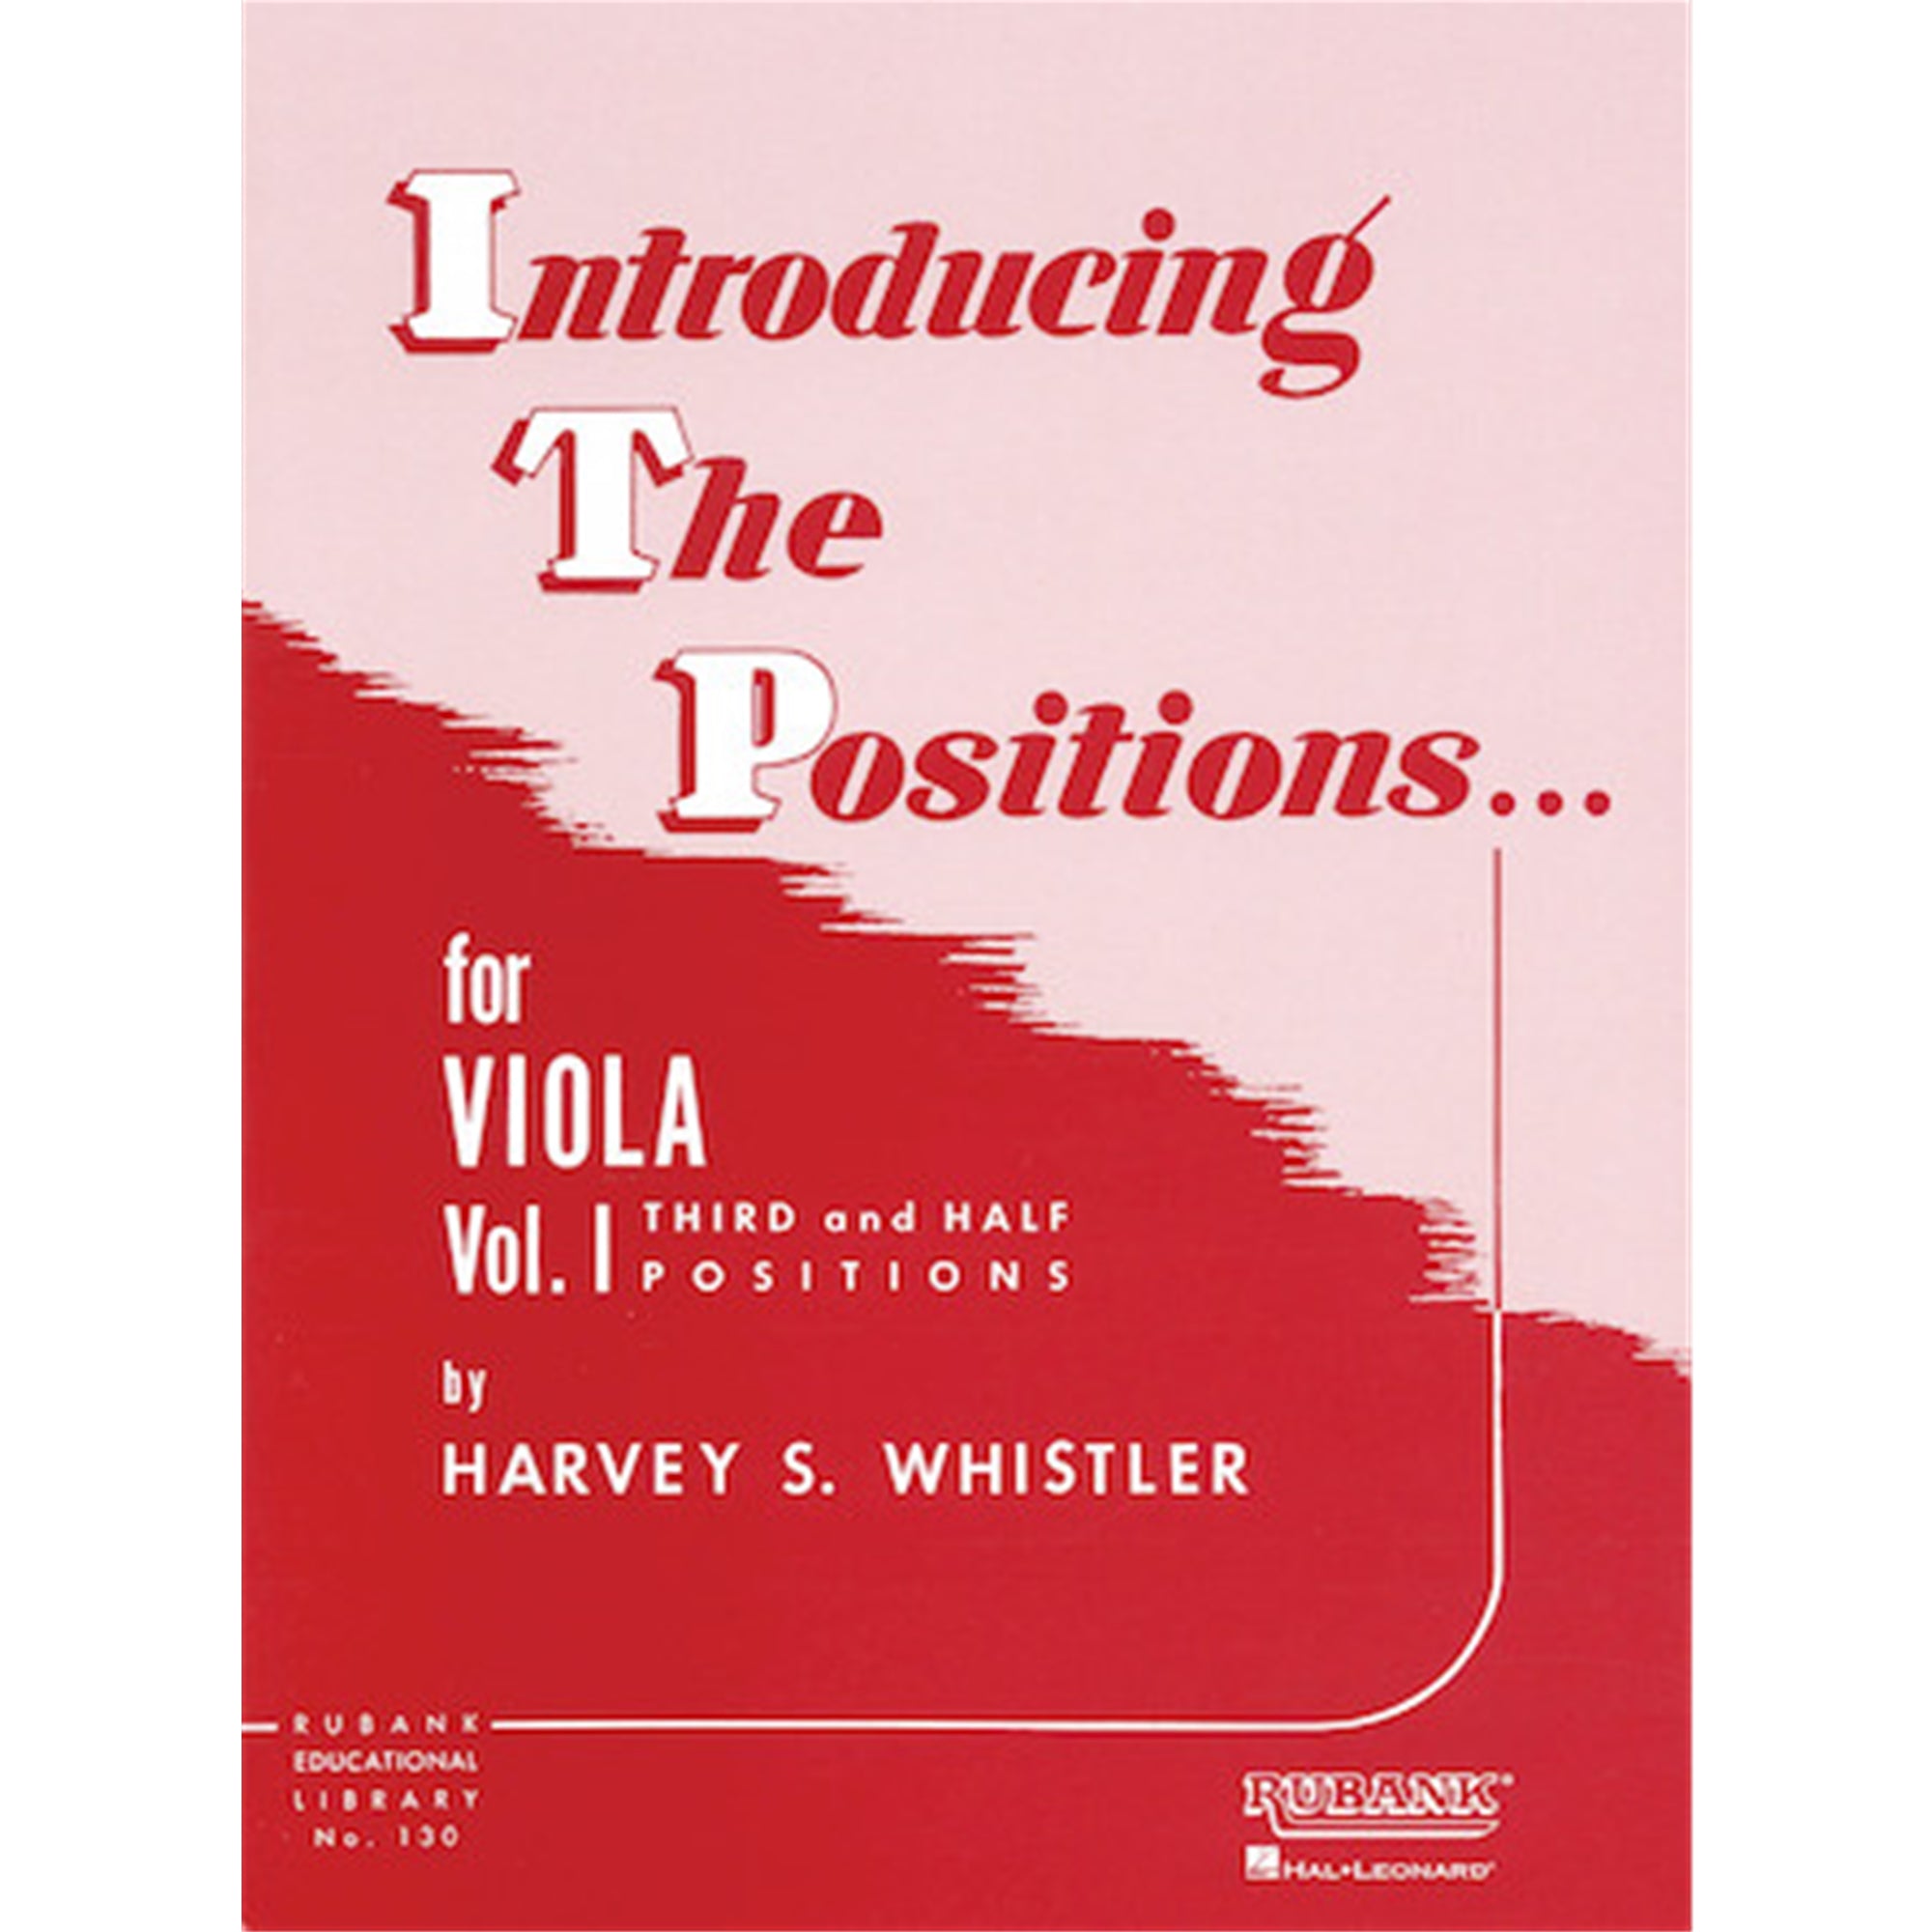 HAL LEONARD 4472790 Introducing the Positions for Viola Volume 1 - Third and Half Positions